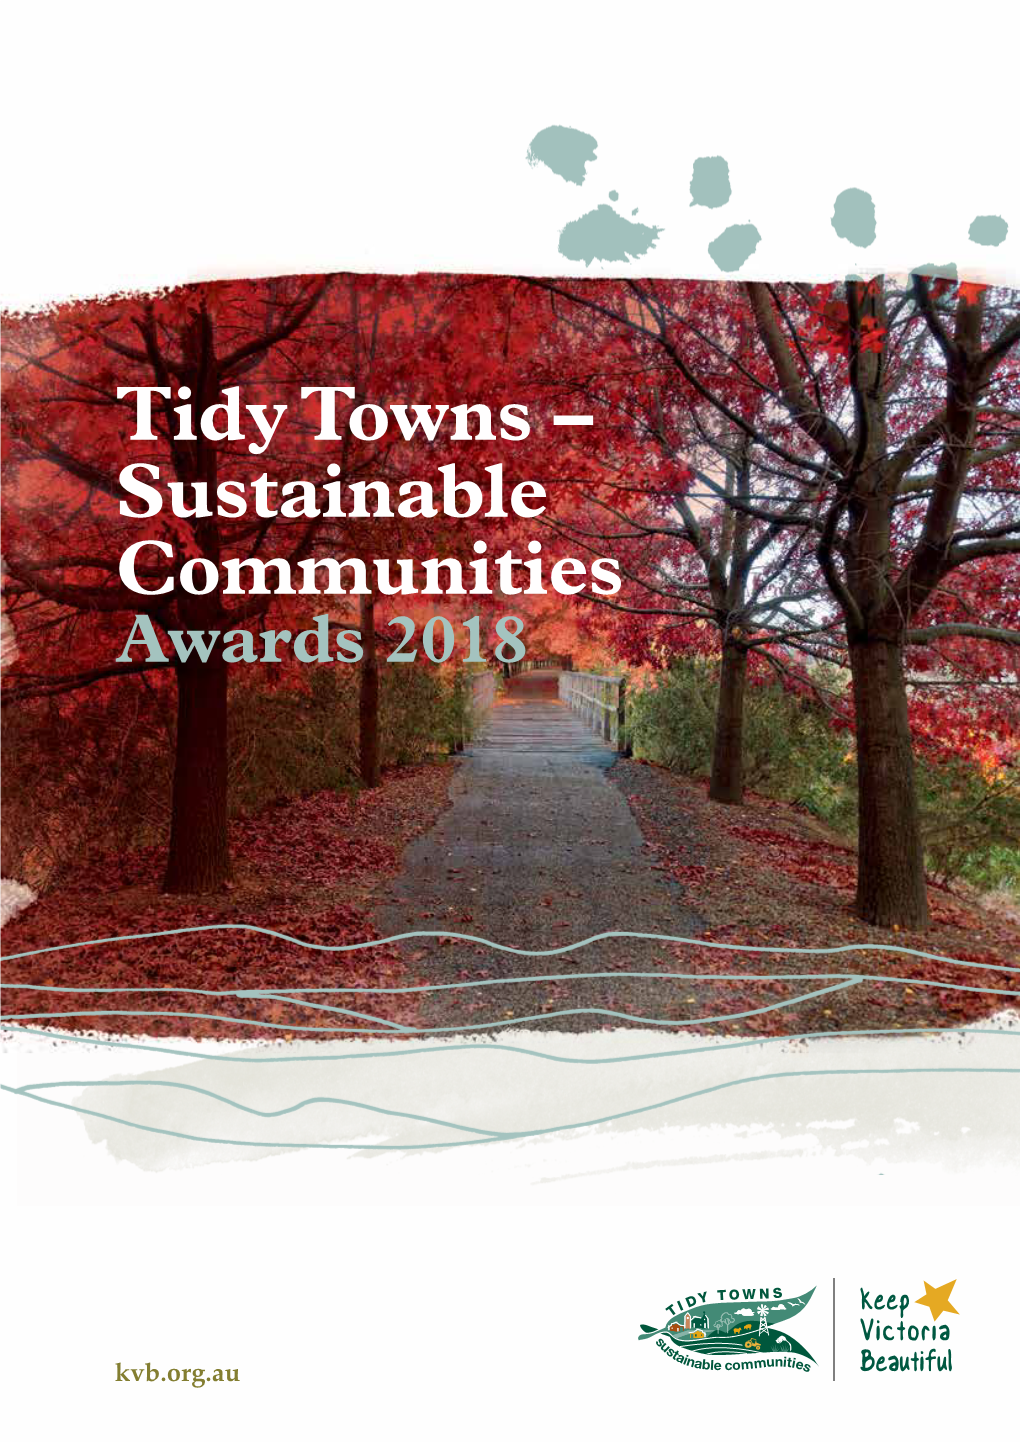 Tidy Towns – Sustainable Communities Awards 2018